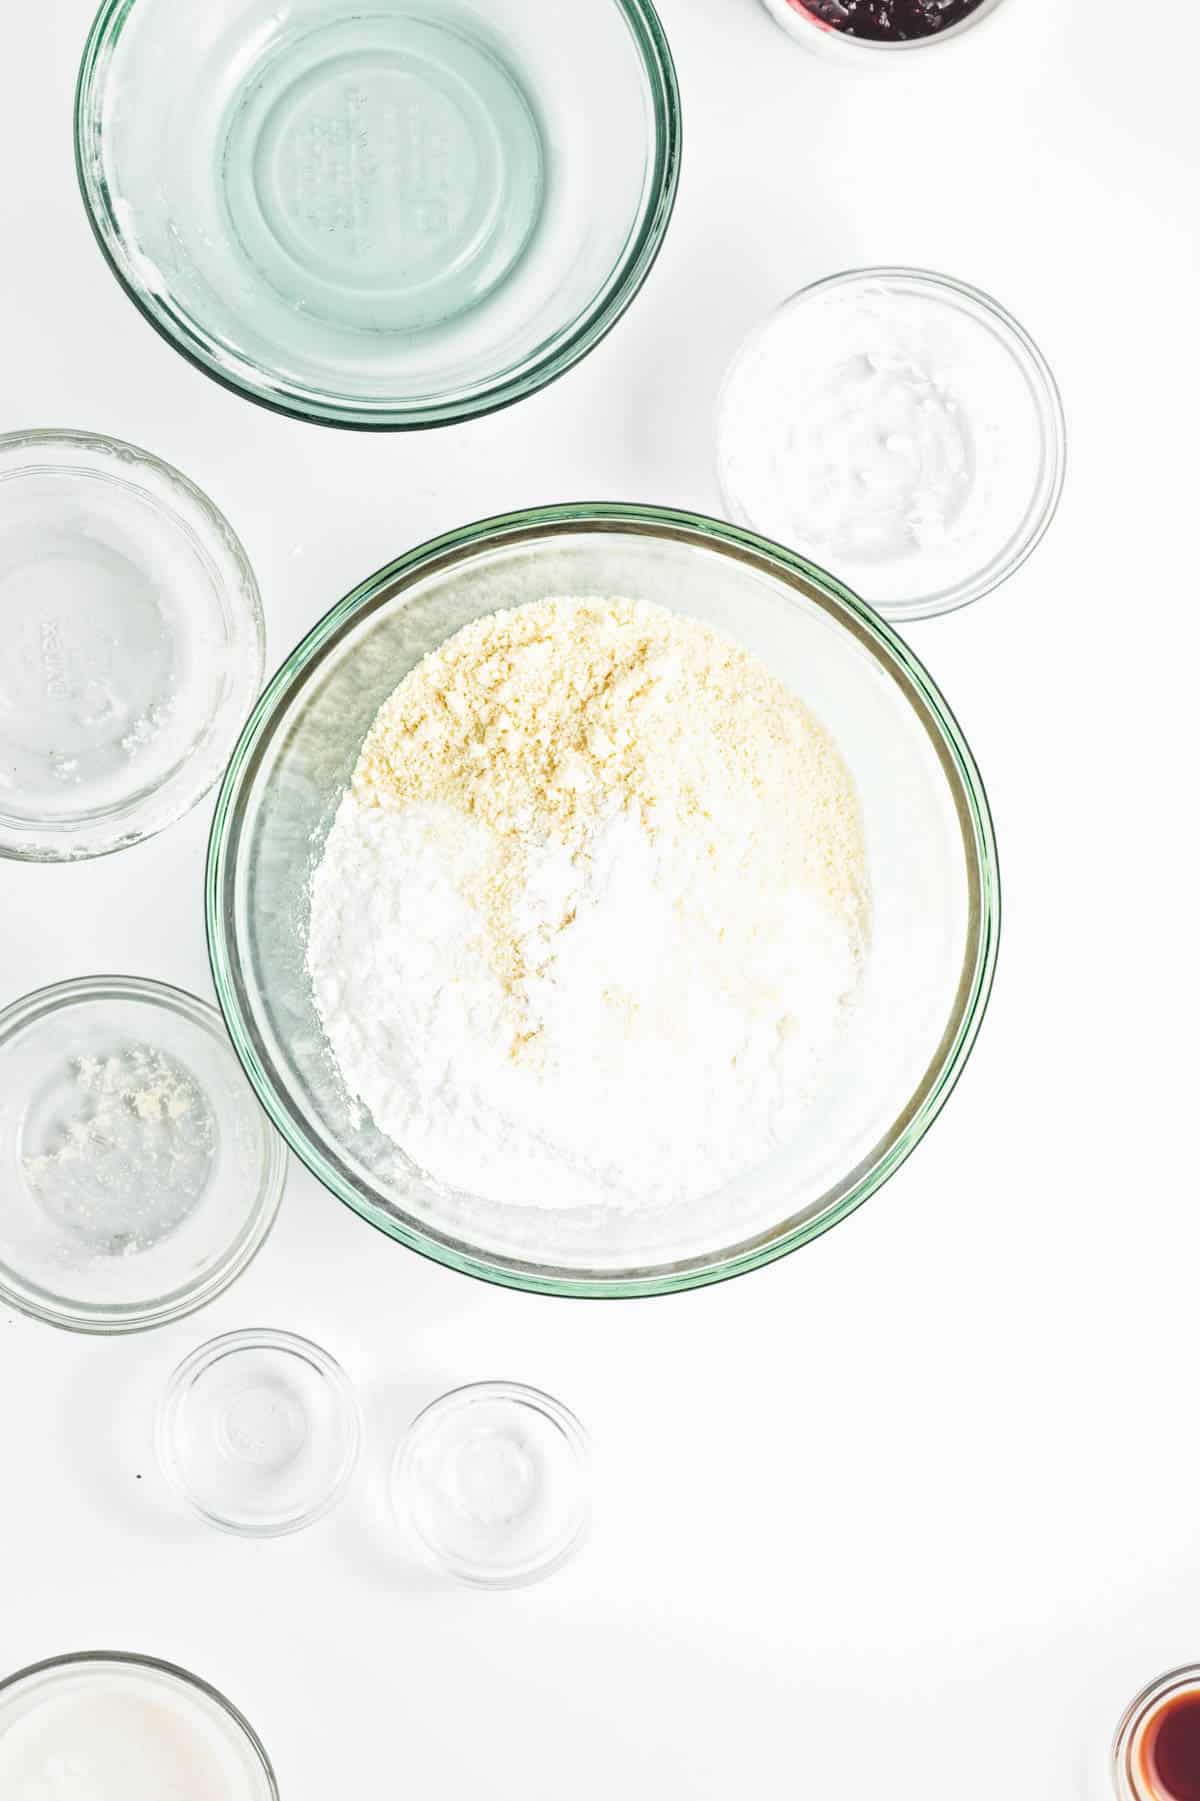 Almond and all-purpose flours in a glass bowl with other ingredients to the sides.